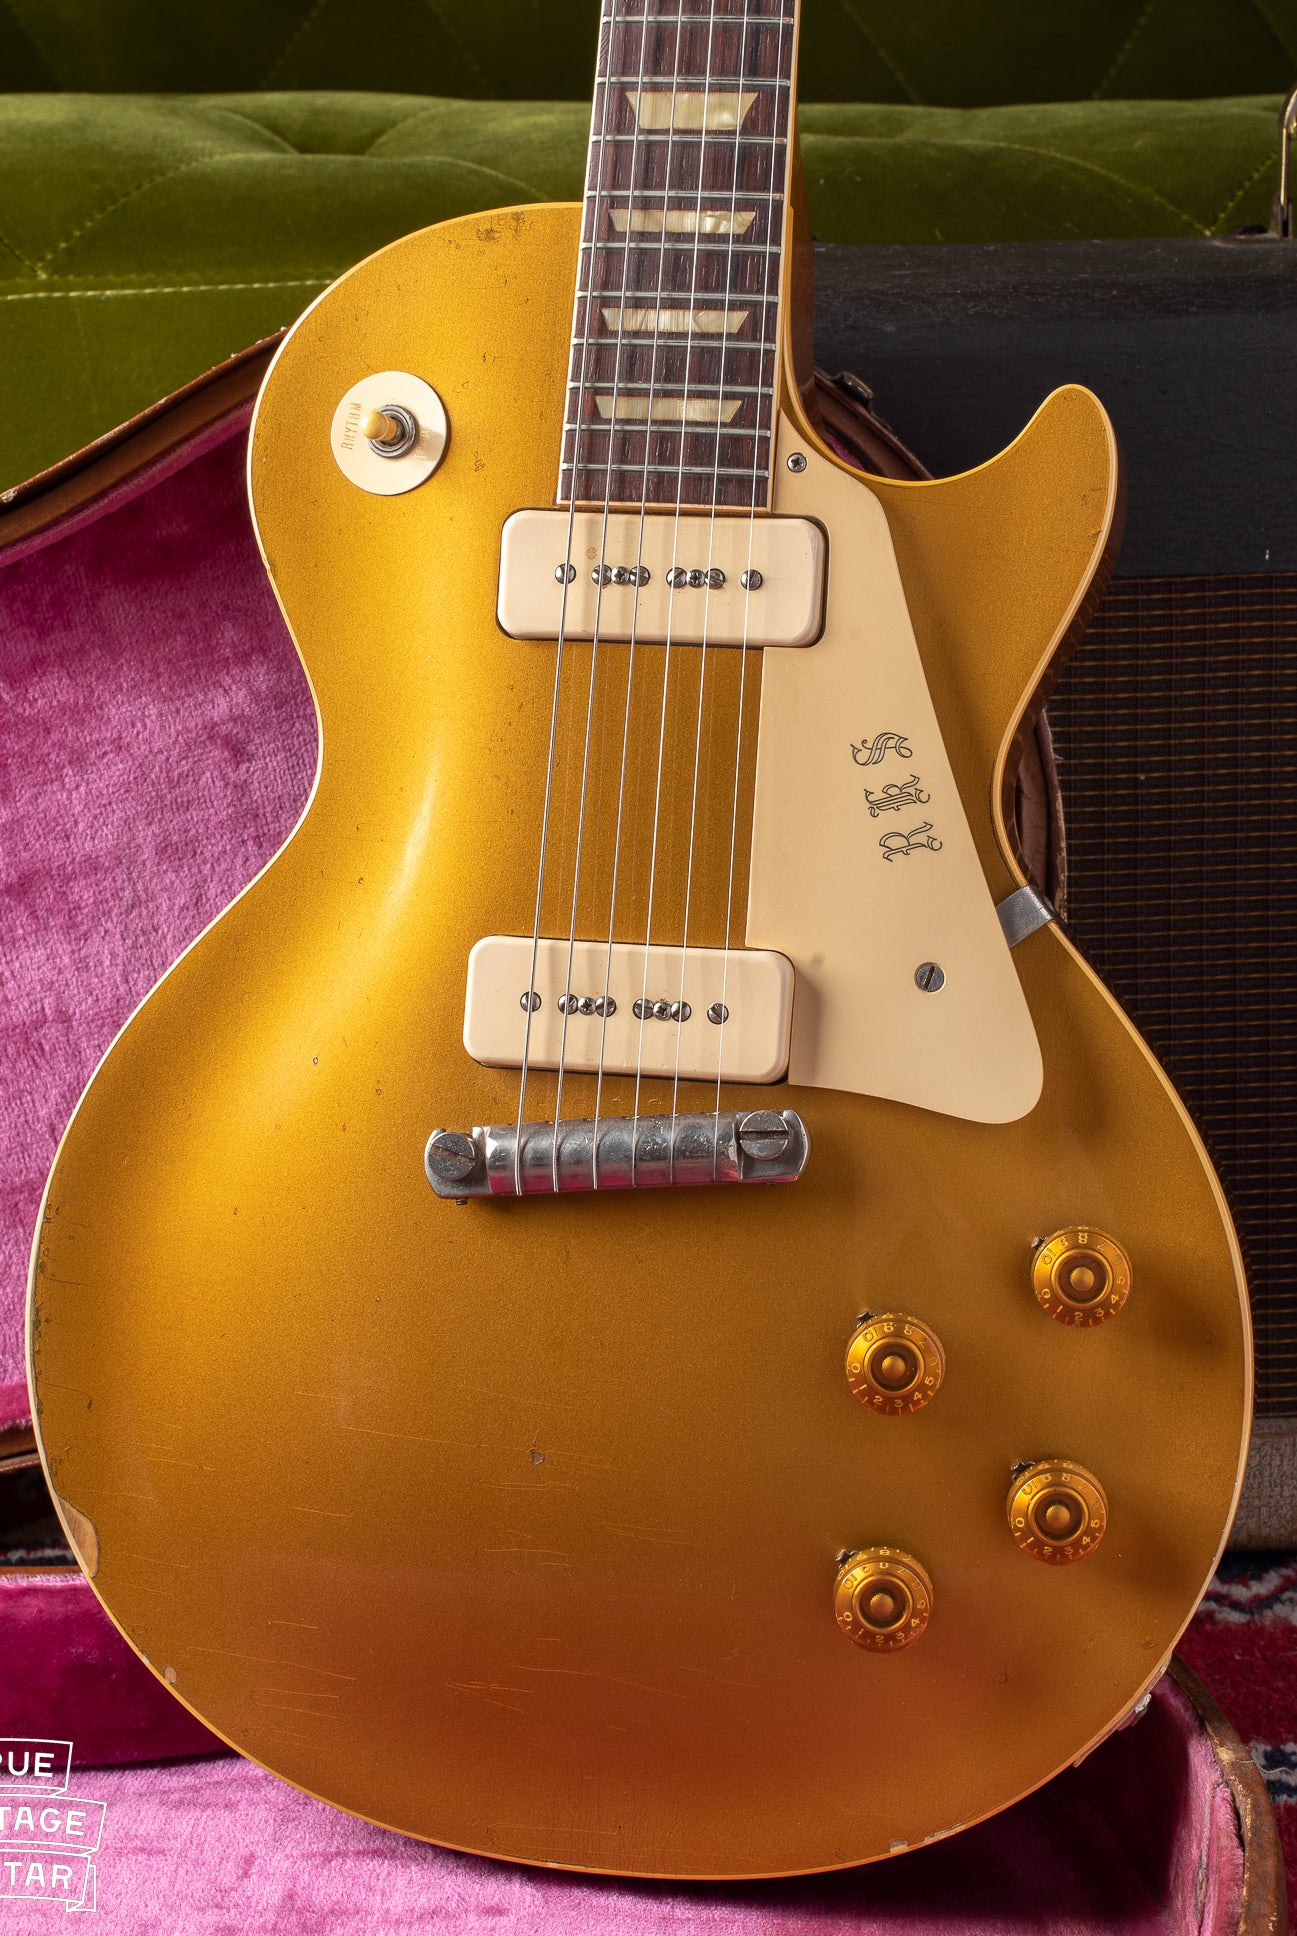 1954 Gibson Les Paul Model gold goldtop vintage guitar from Colorado